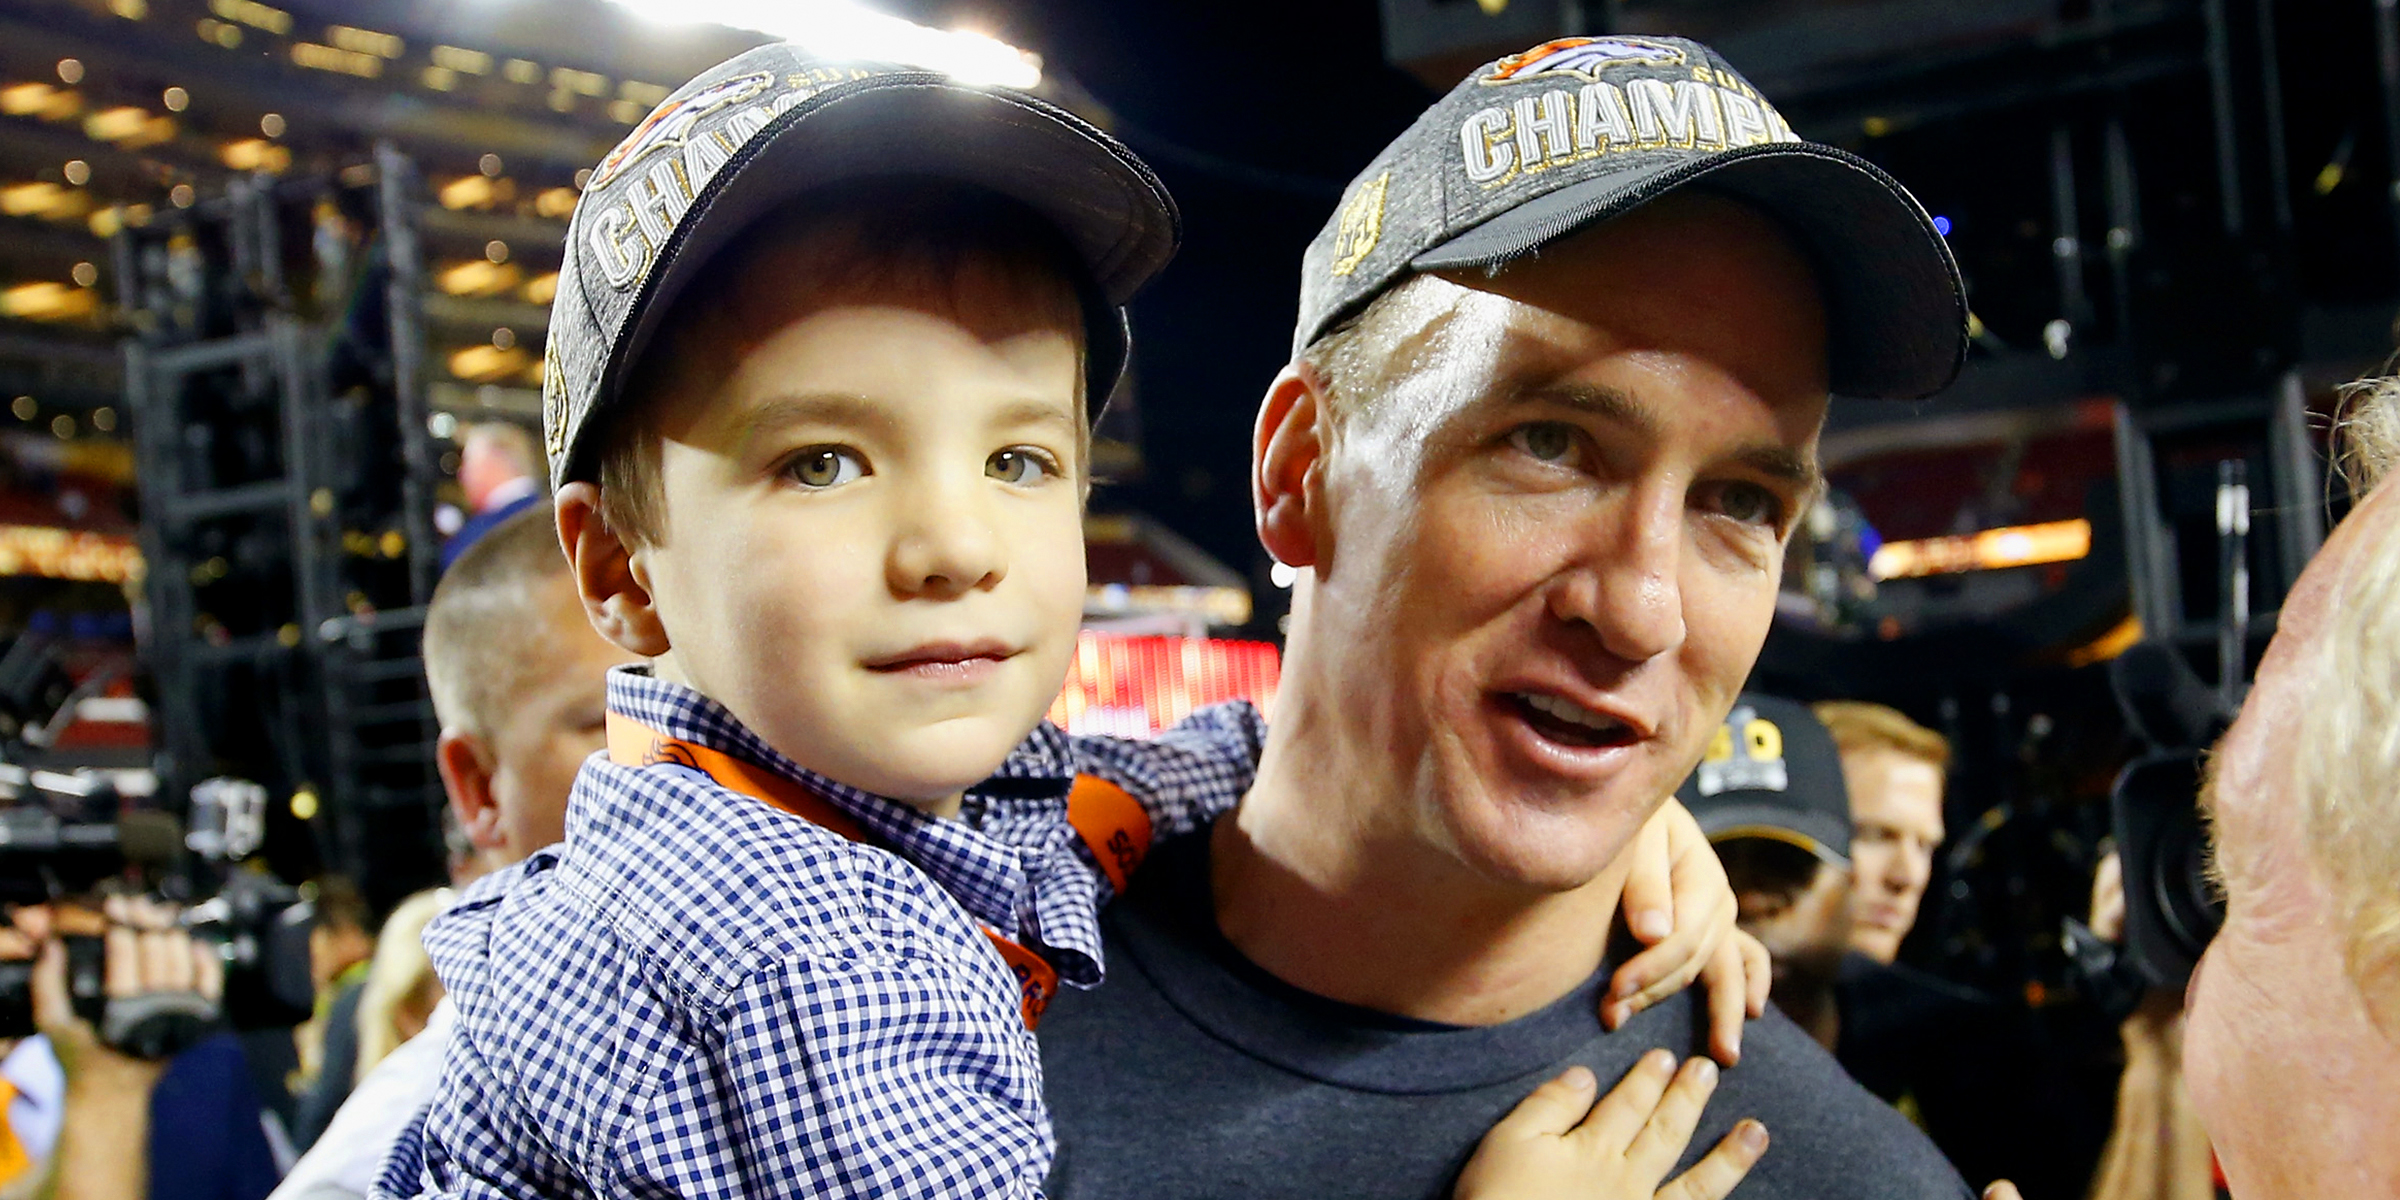 Marshall Williams Manning and His Dad Peyton Manning | Source: Getty Images